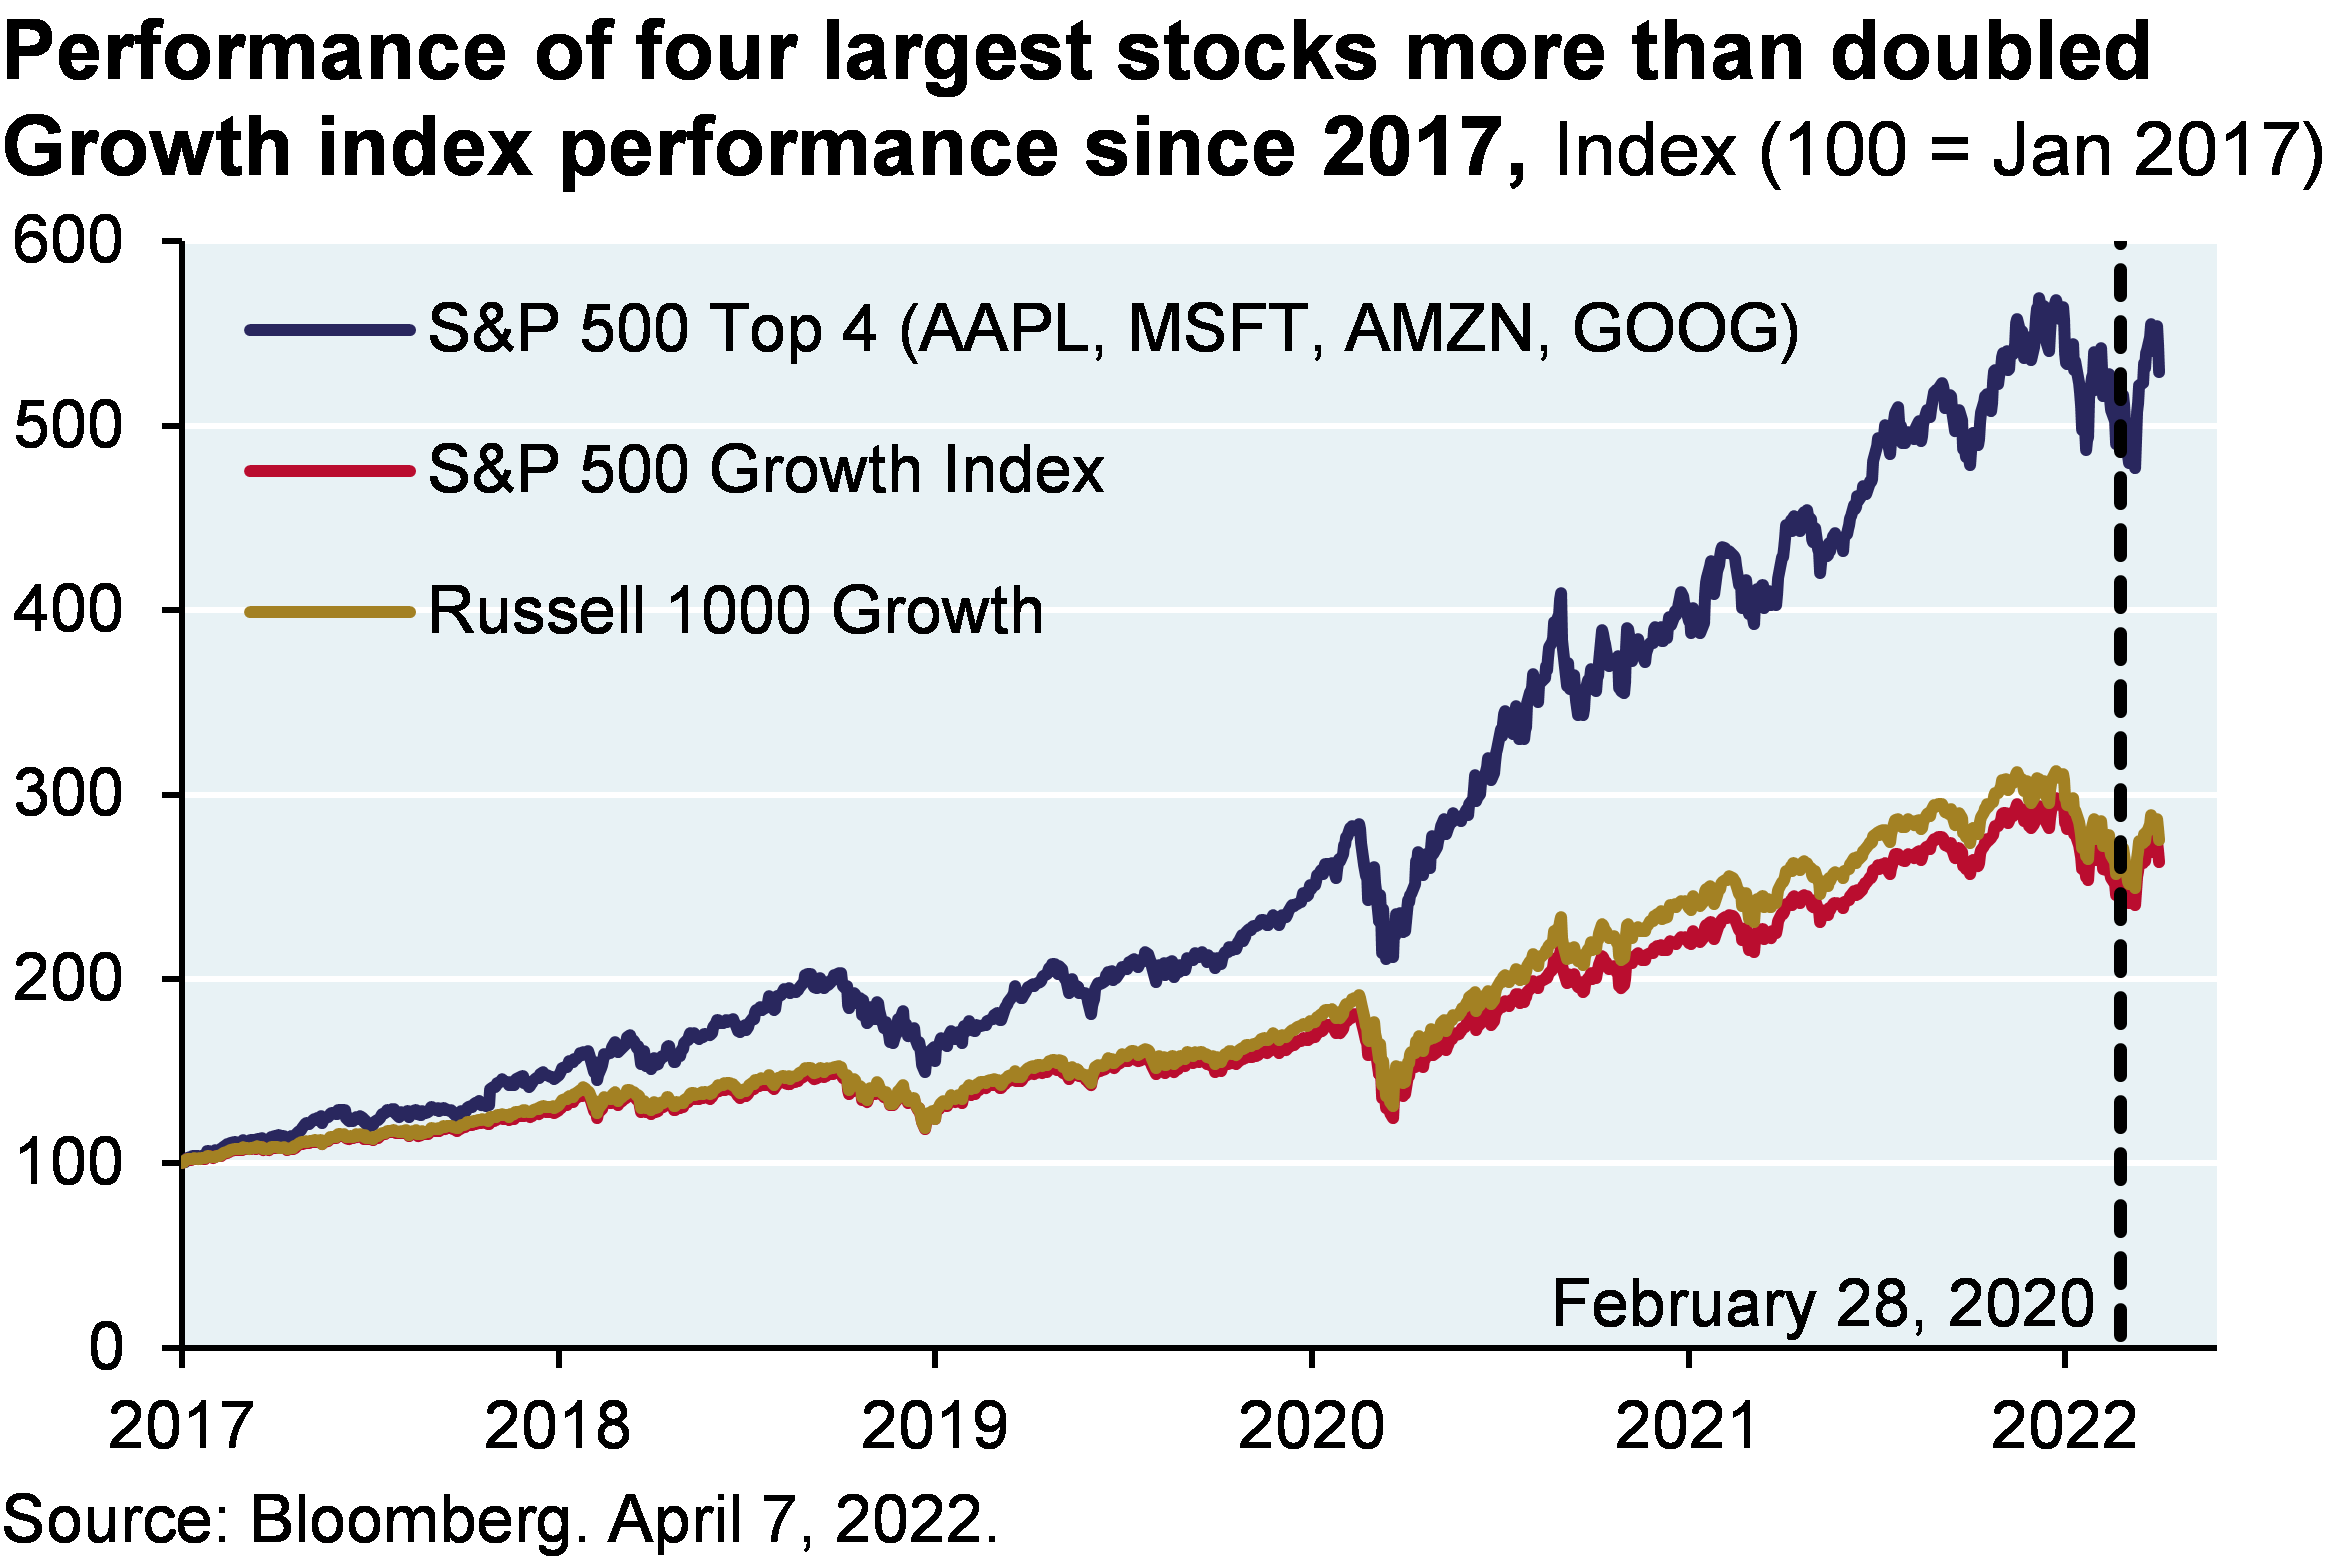 Line chart shows the performance of the 4 largest stocks in the S&P 500 vs the S&P 500 Growth Index and the Russell 1000 Growth Index. The performance of the top 4 stocks more than doubled the 2 indices.